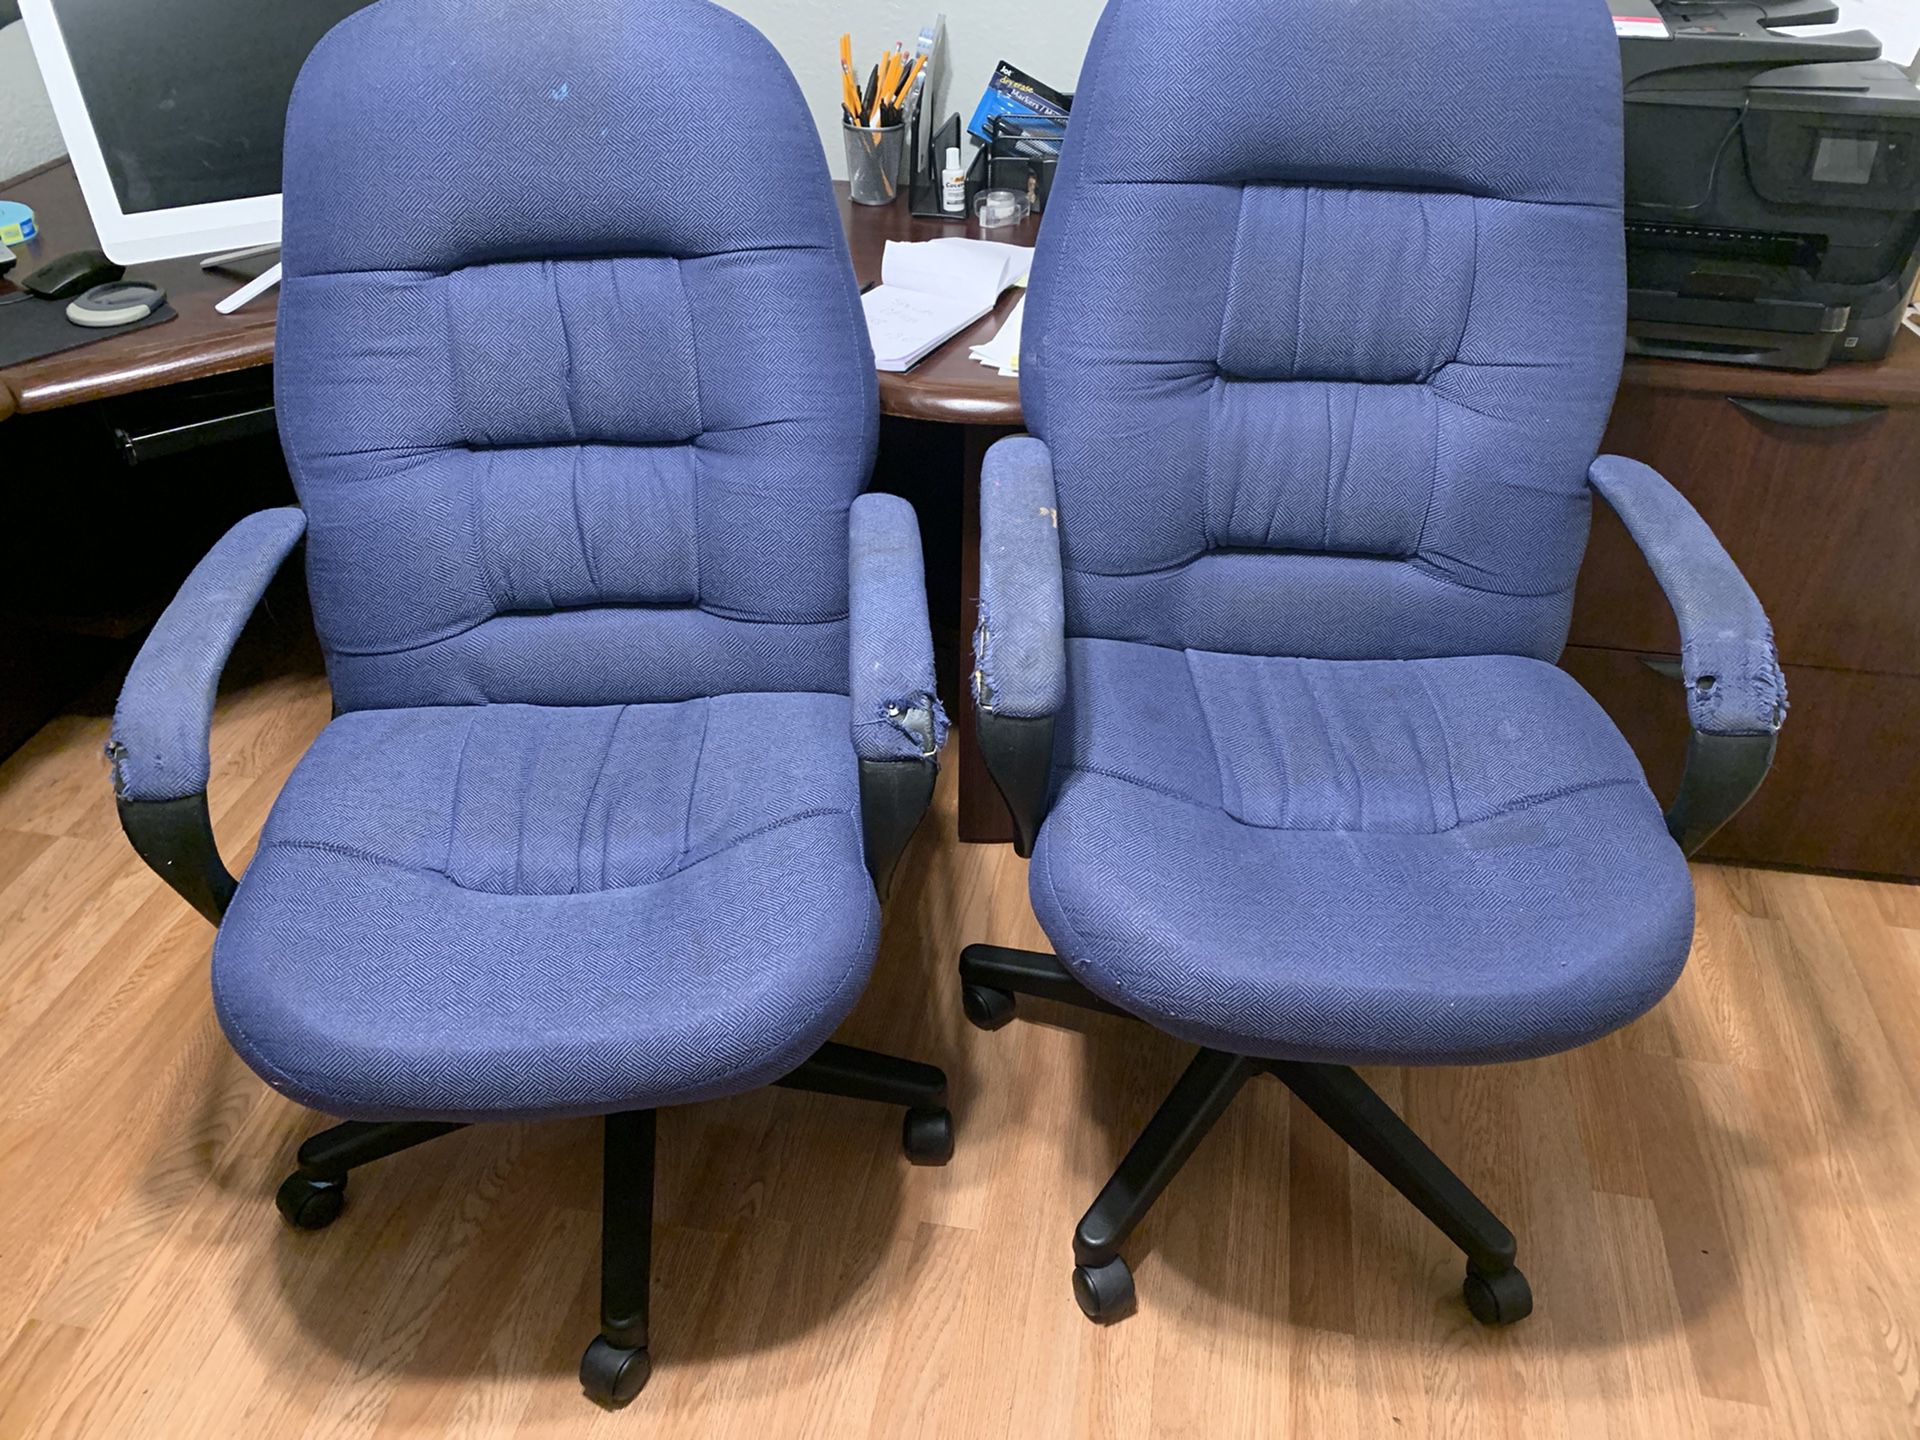 Two matching rolling office chairs needs a little TLC both for 25 you pick up